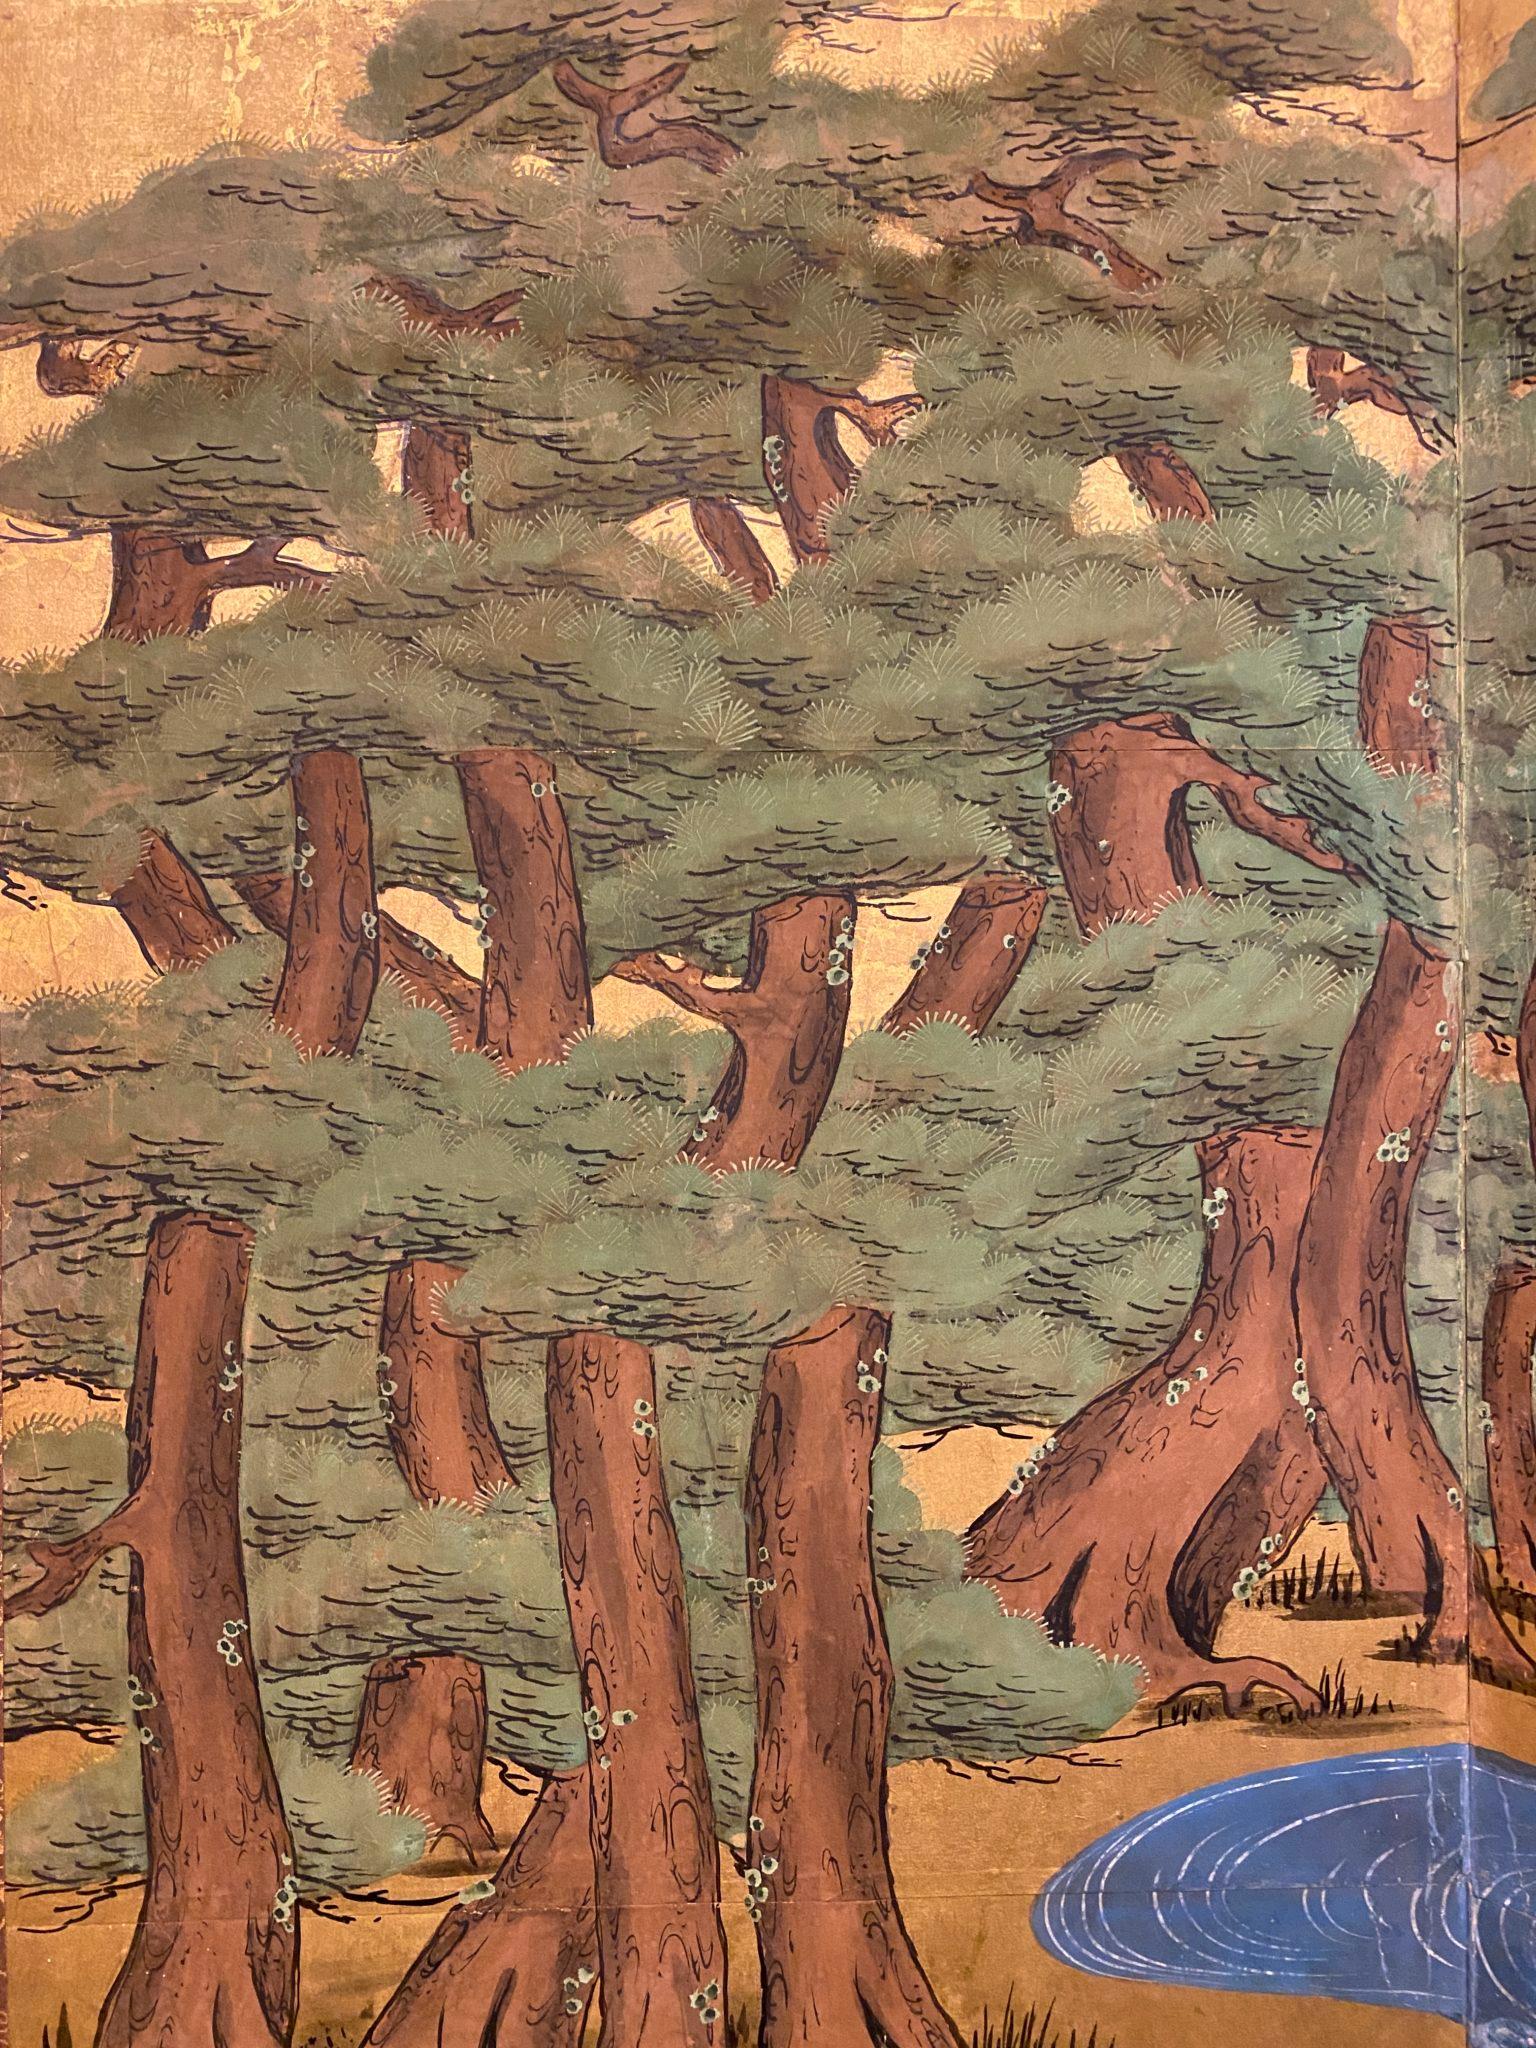 Hamamatsu (Pine Tree Island). Kano School painting in mineral pigments on gold leaf and mulberry paper with brocade border.